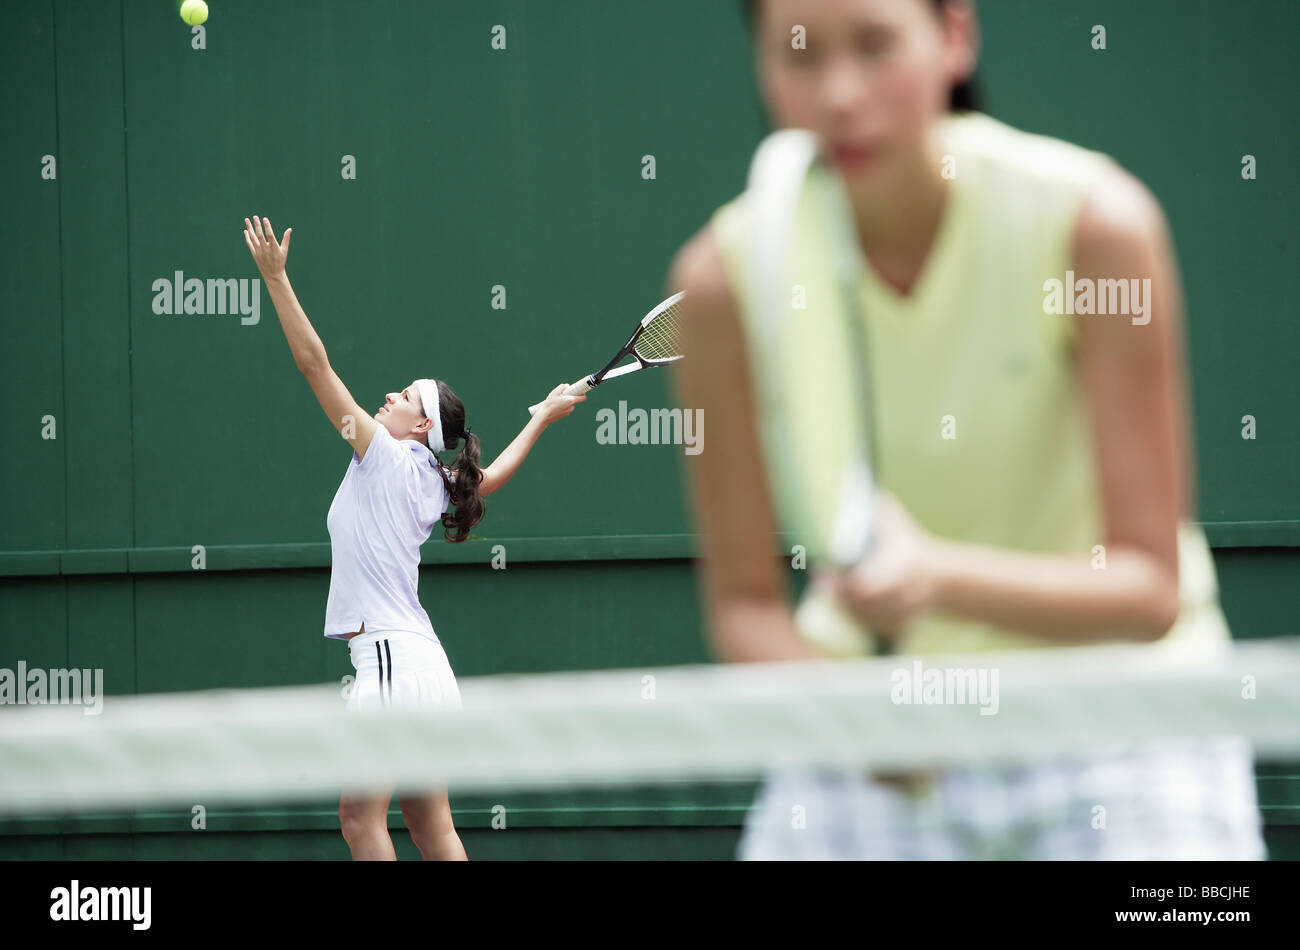 Women playing tennis together Stock Photo